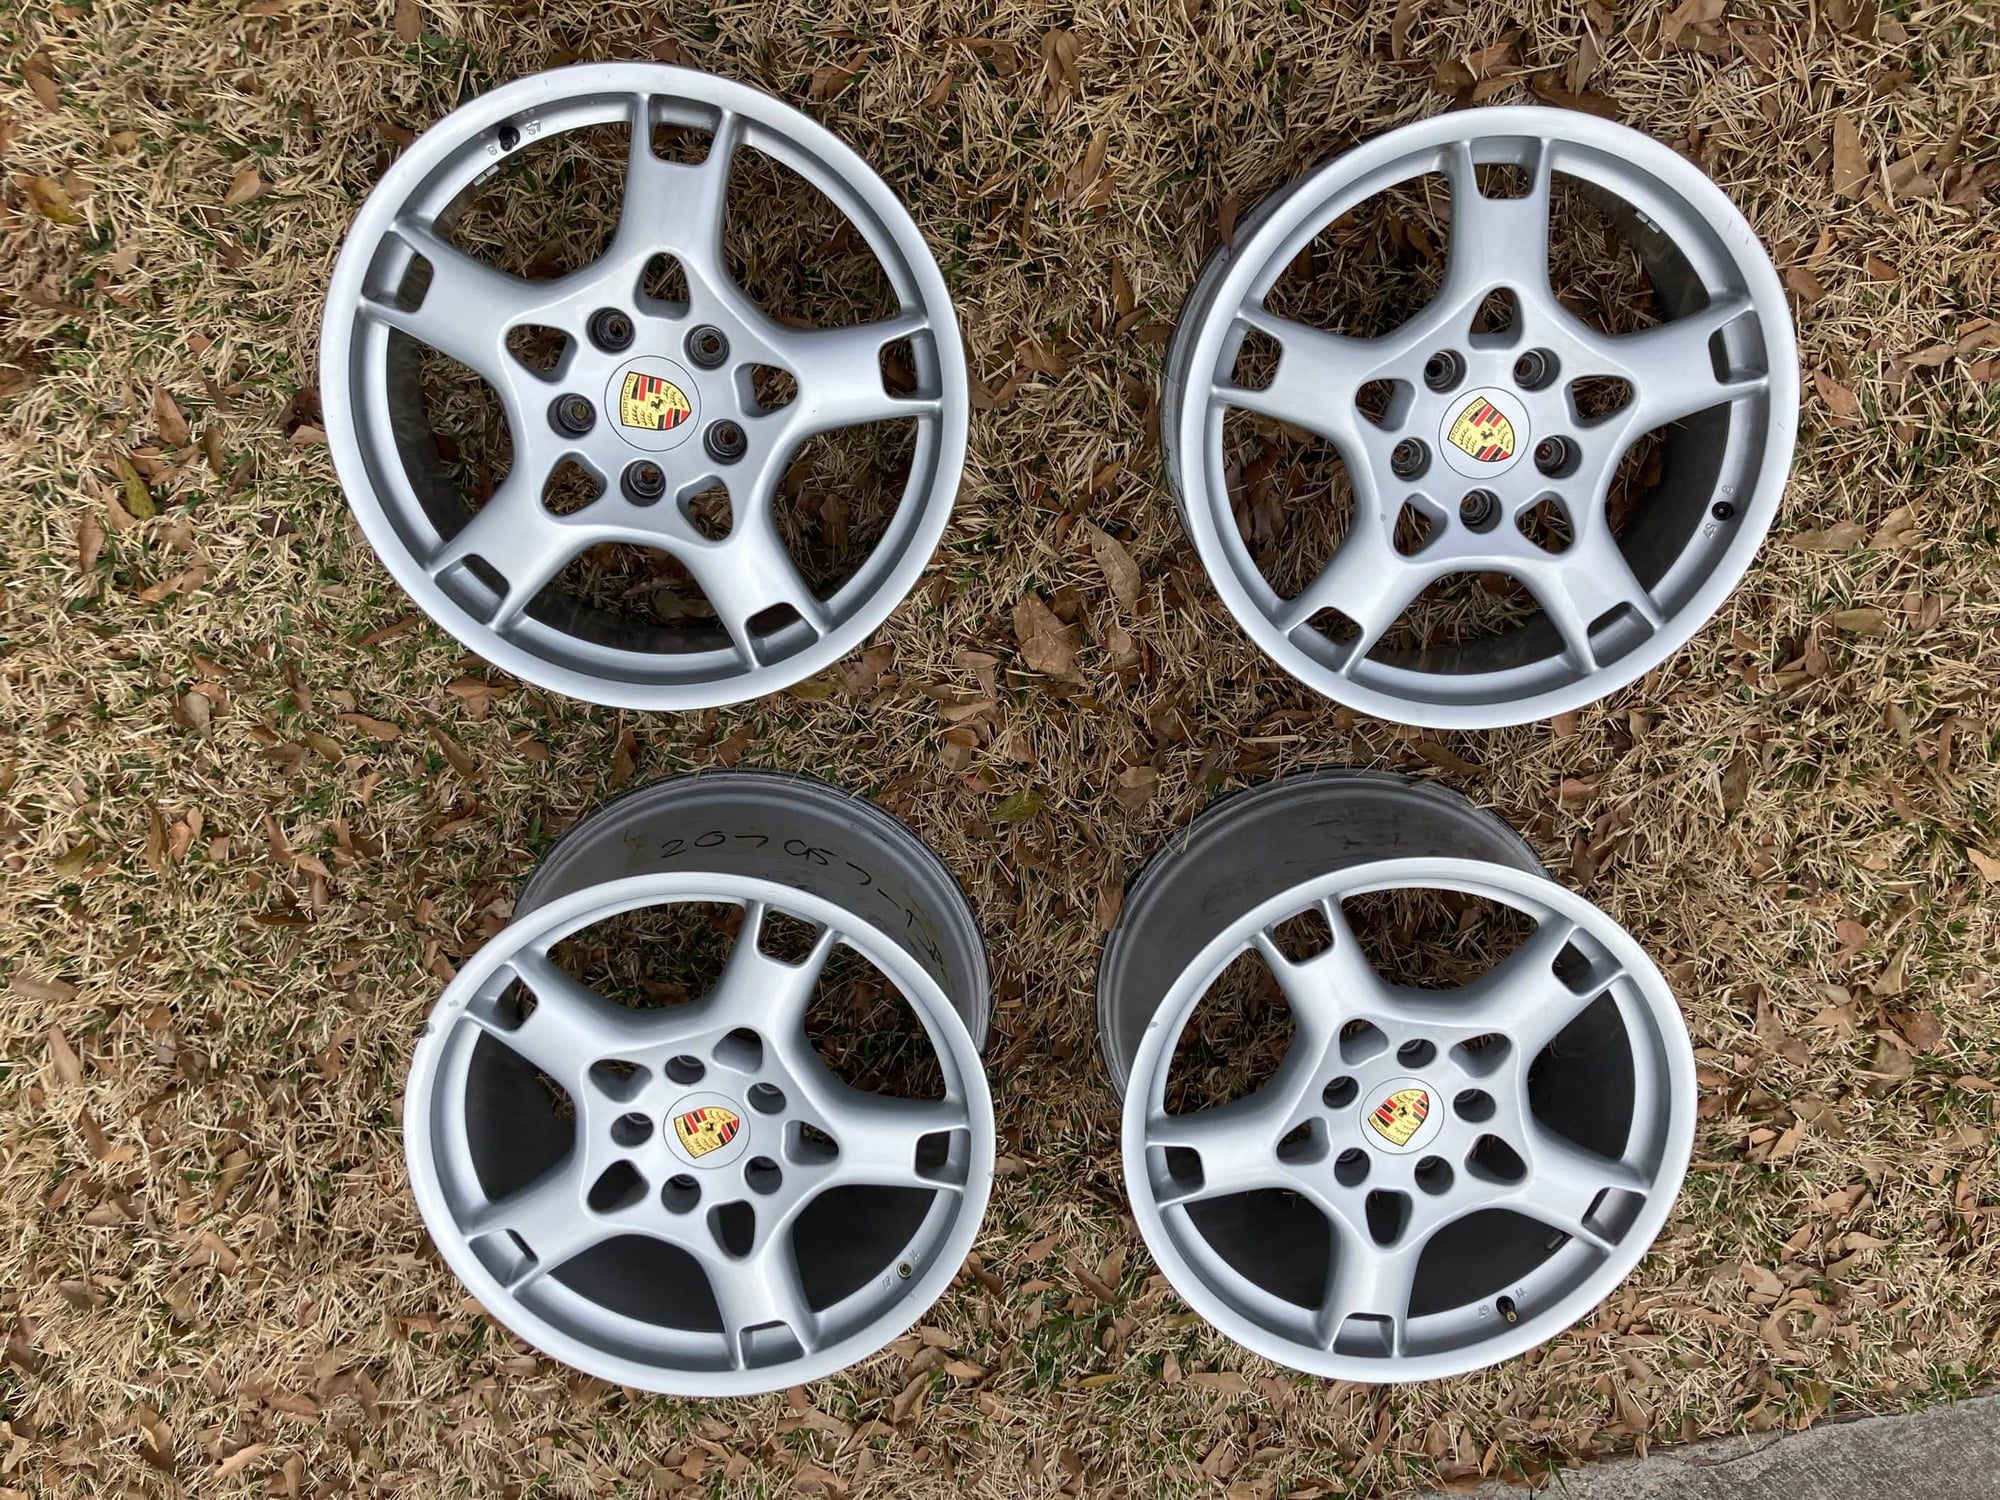 Wheels and Tires/Axles - 997 C2S OEM Wheels - Lobster - Used - 0  All Models - Spring, TX 77380, United States